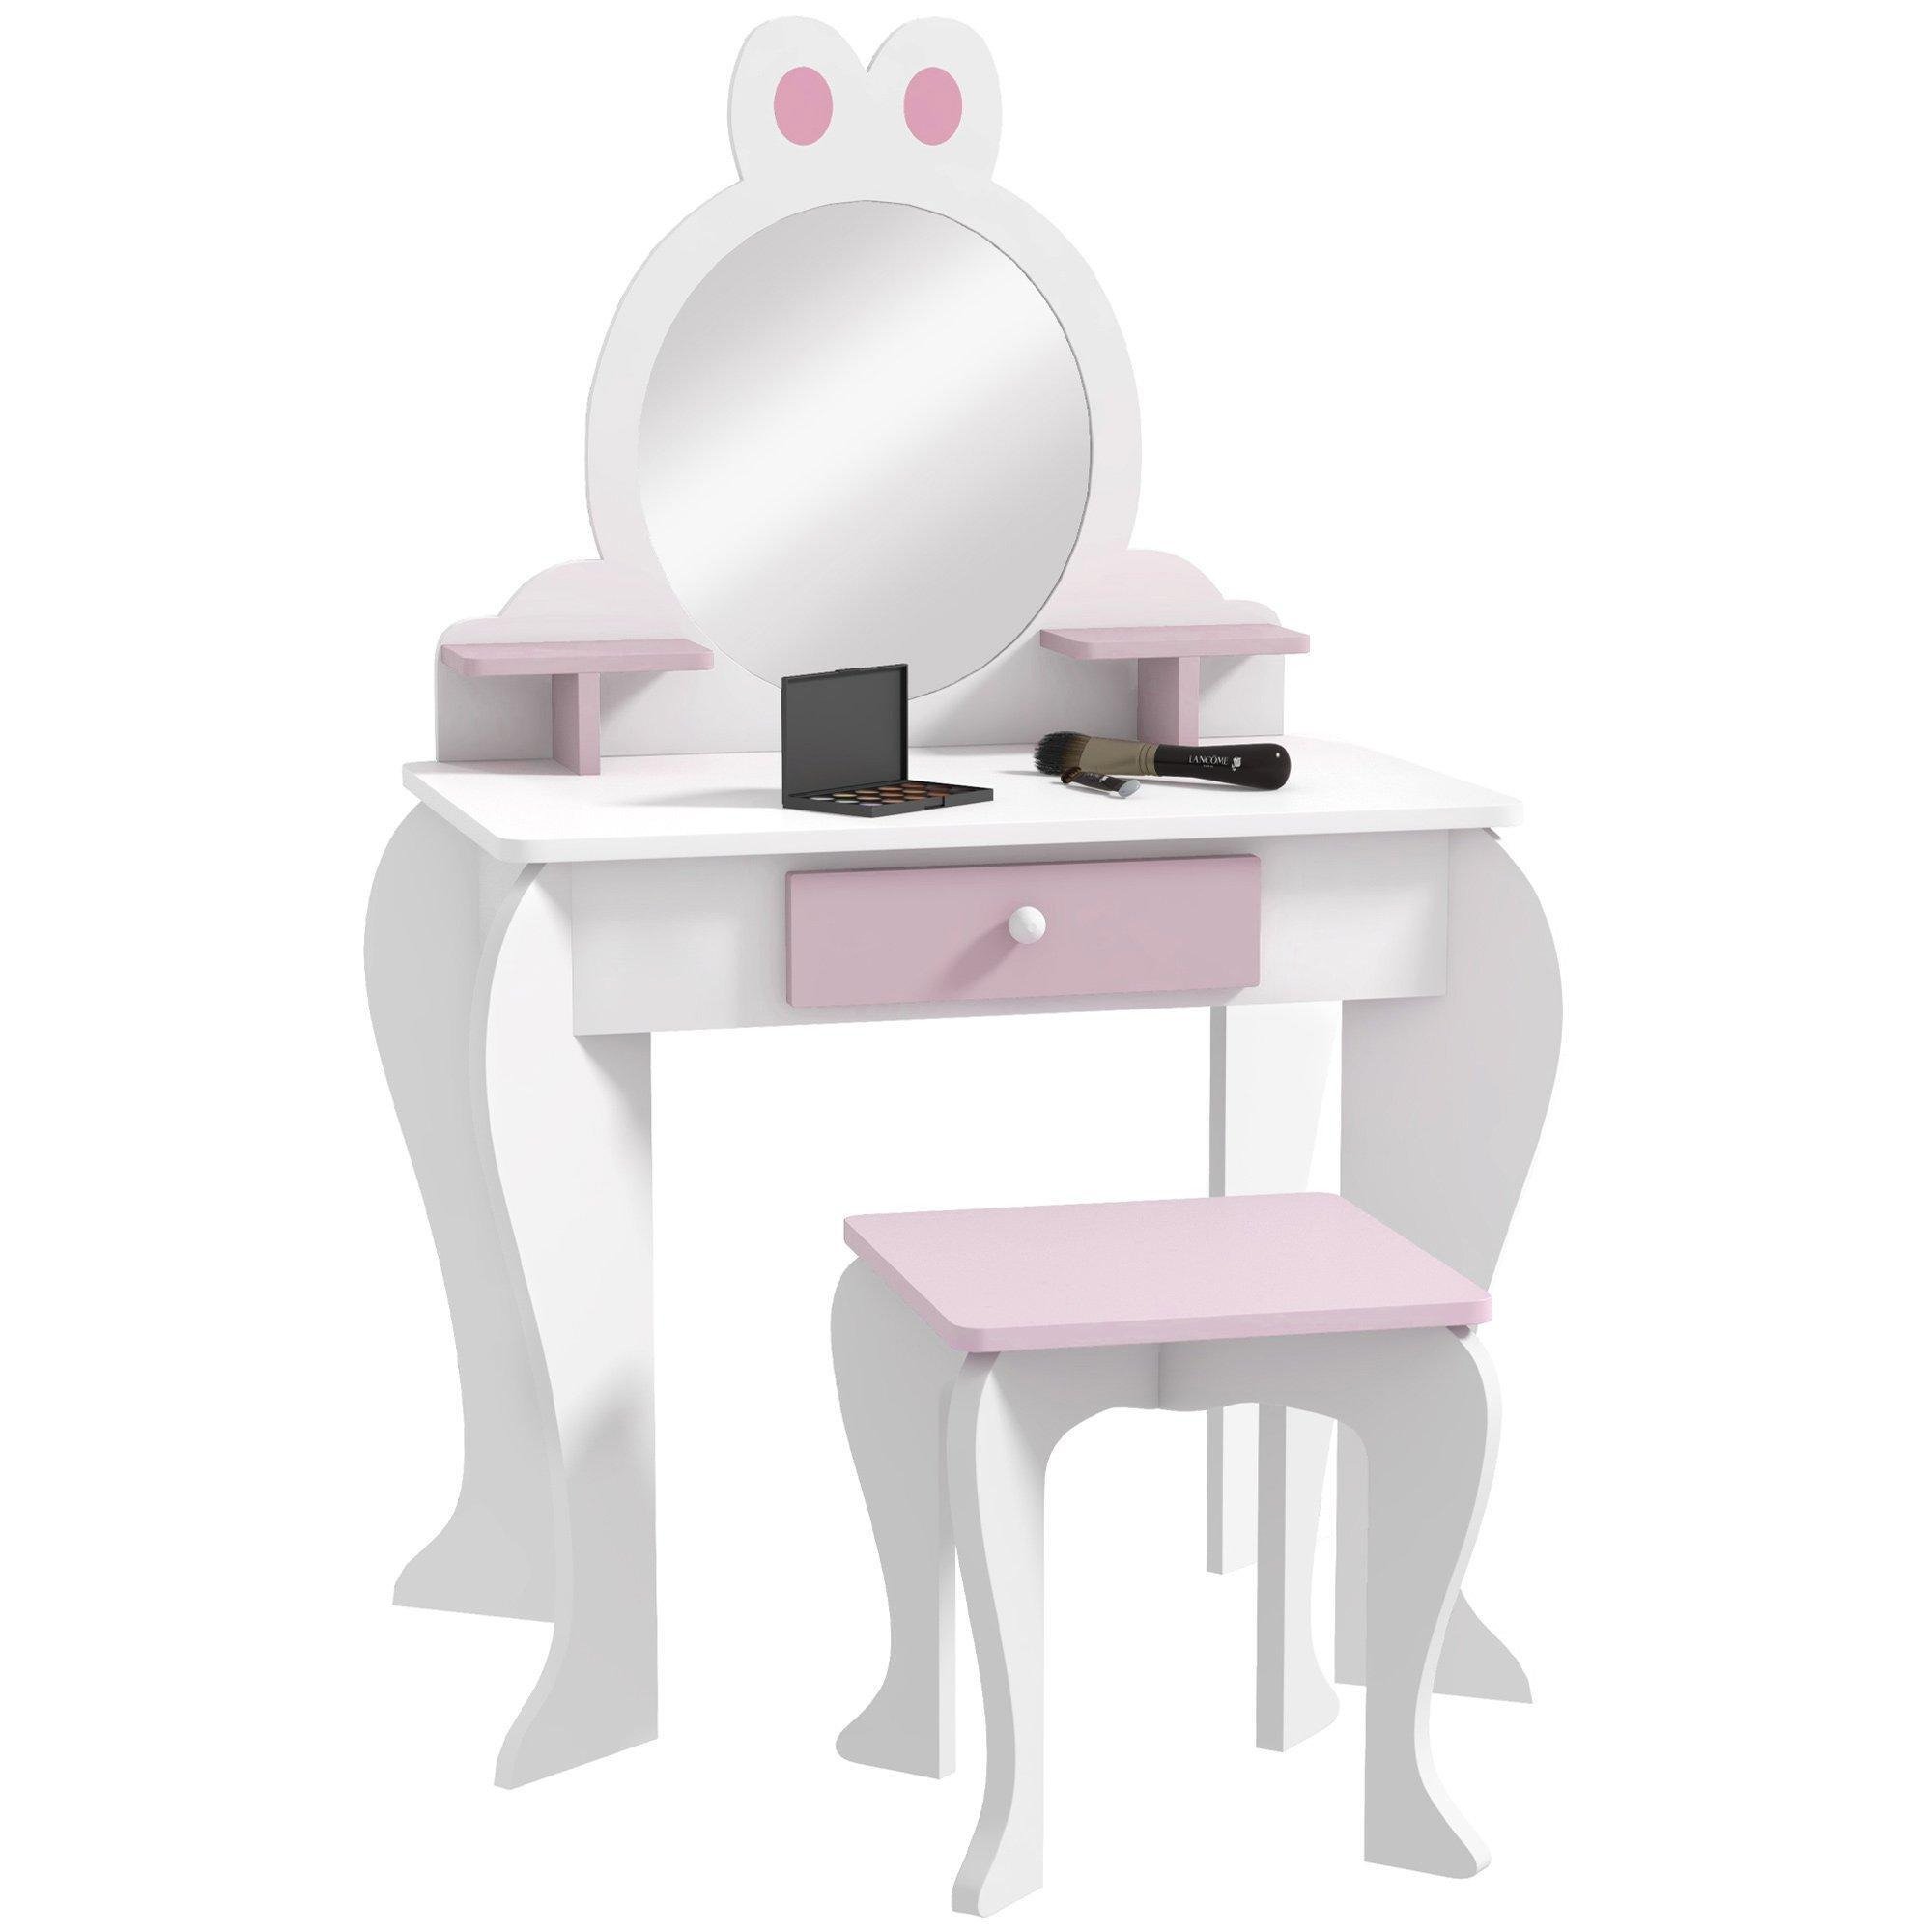 Kids Dressing Table with Mirror and Stool, Rabbit Design, for Ages 3-6 Years - image 1